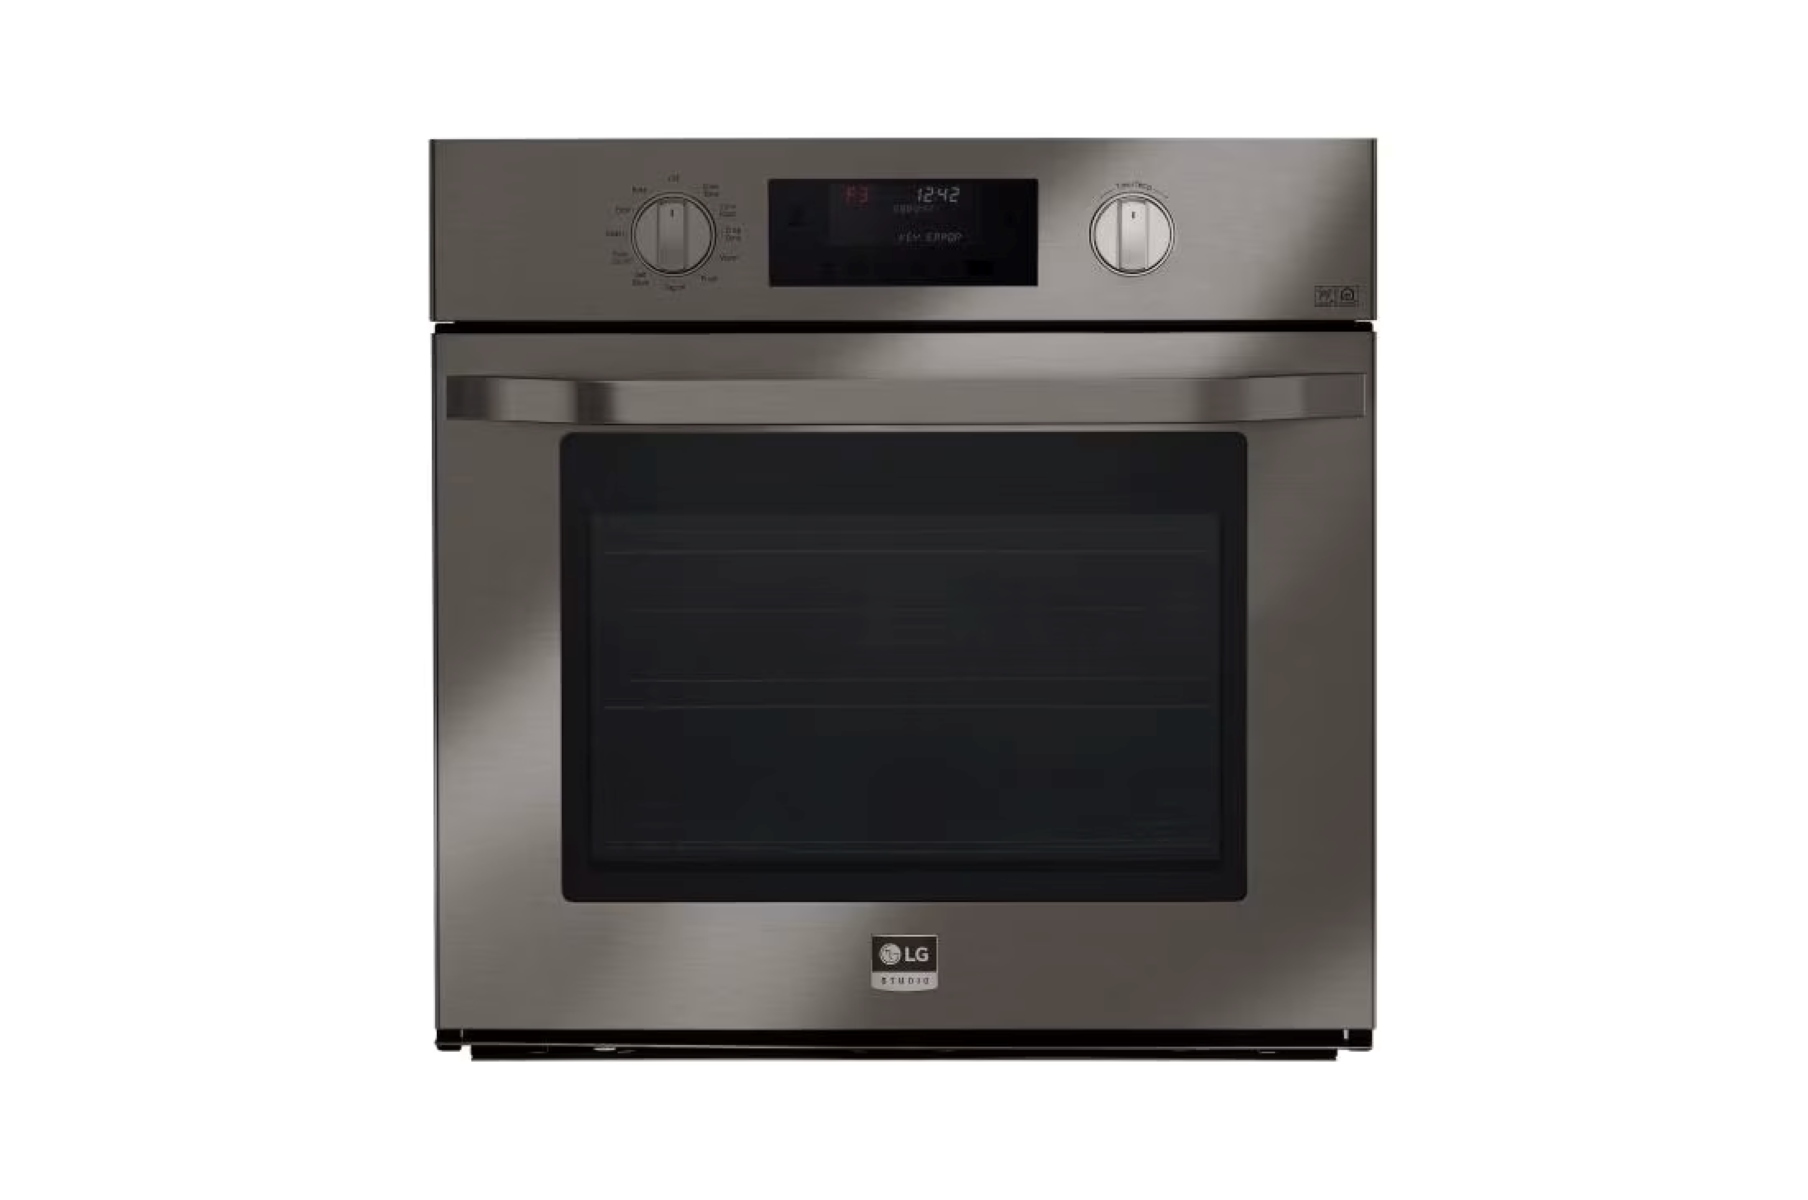 How To Fix The Error Code F-21 For LG Oven